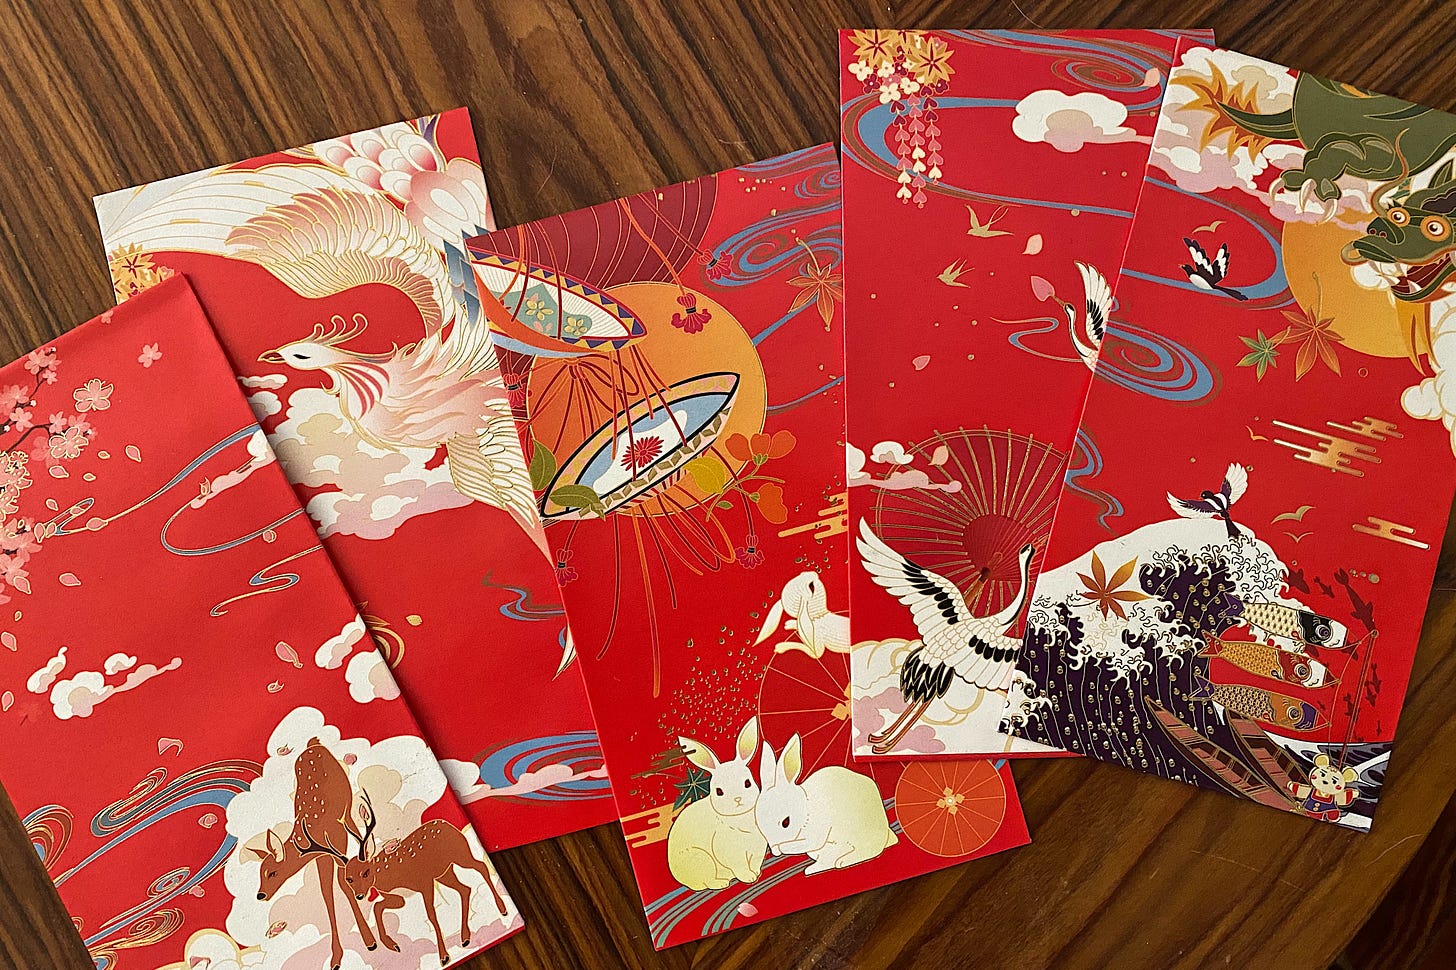 Image of five red envelopes festooned with deer, phoenix, rabbits, cranes, and dragons